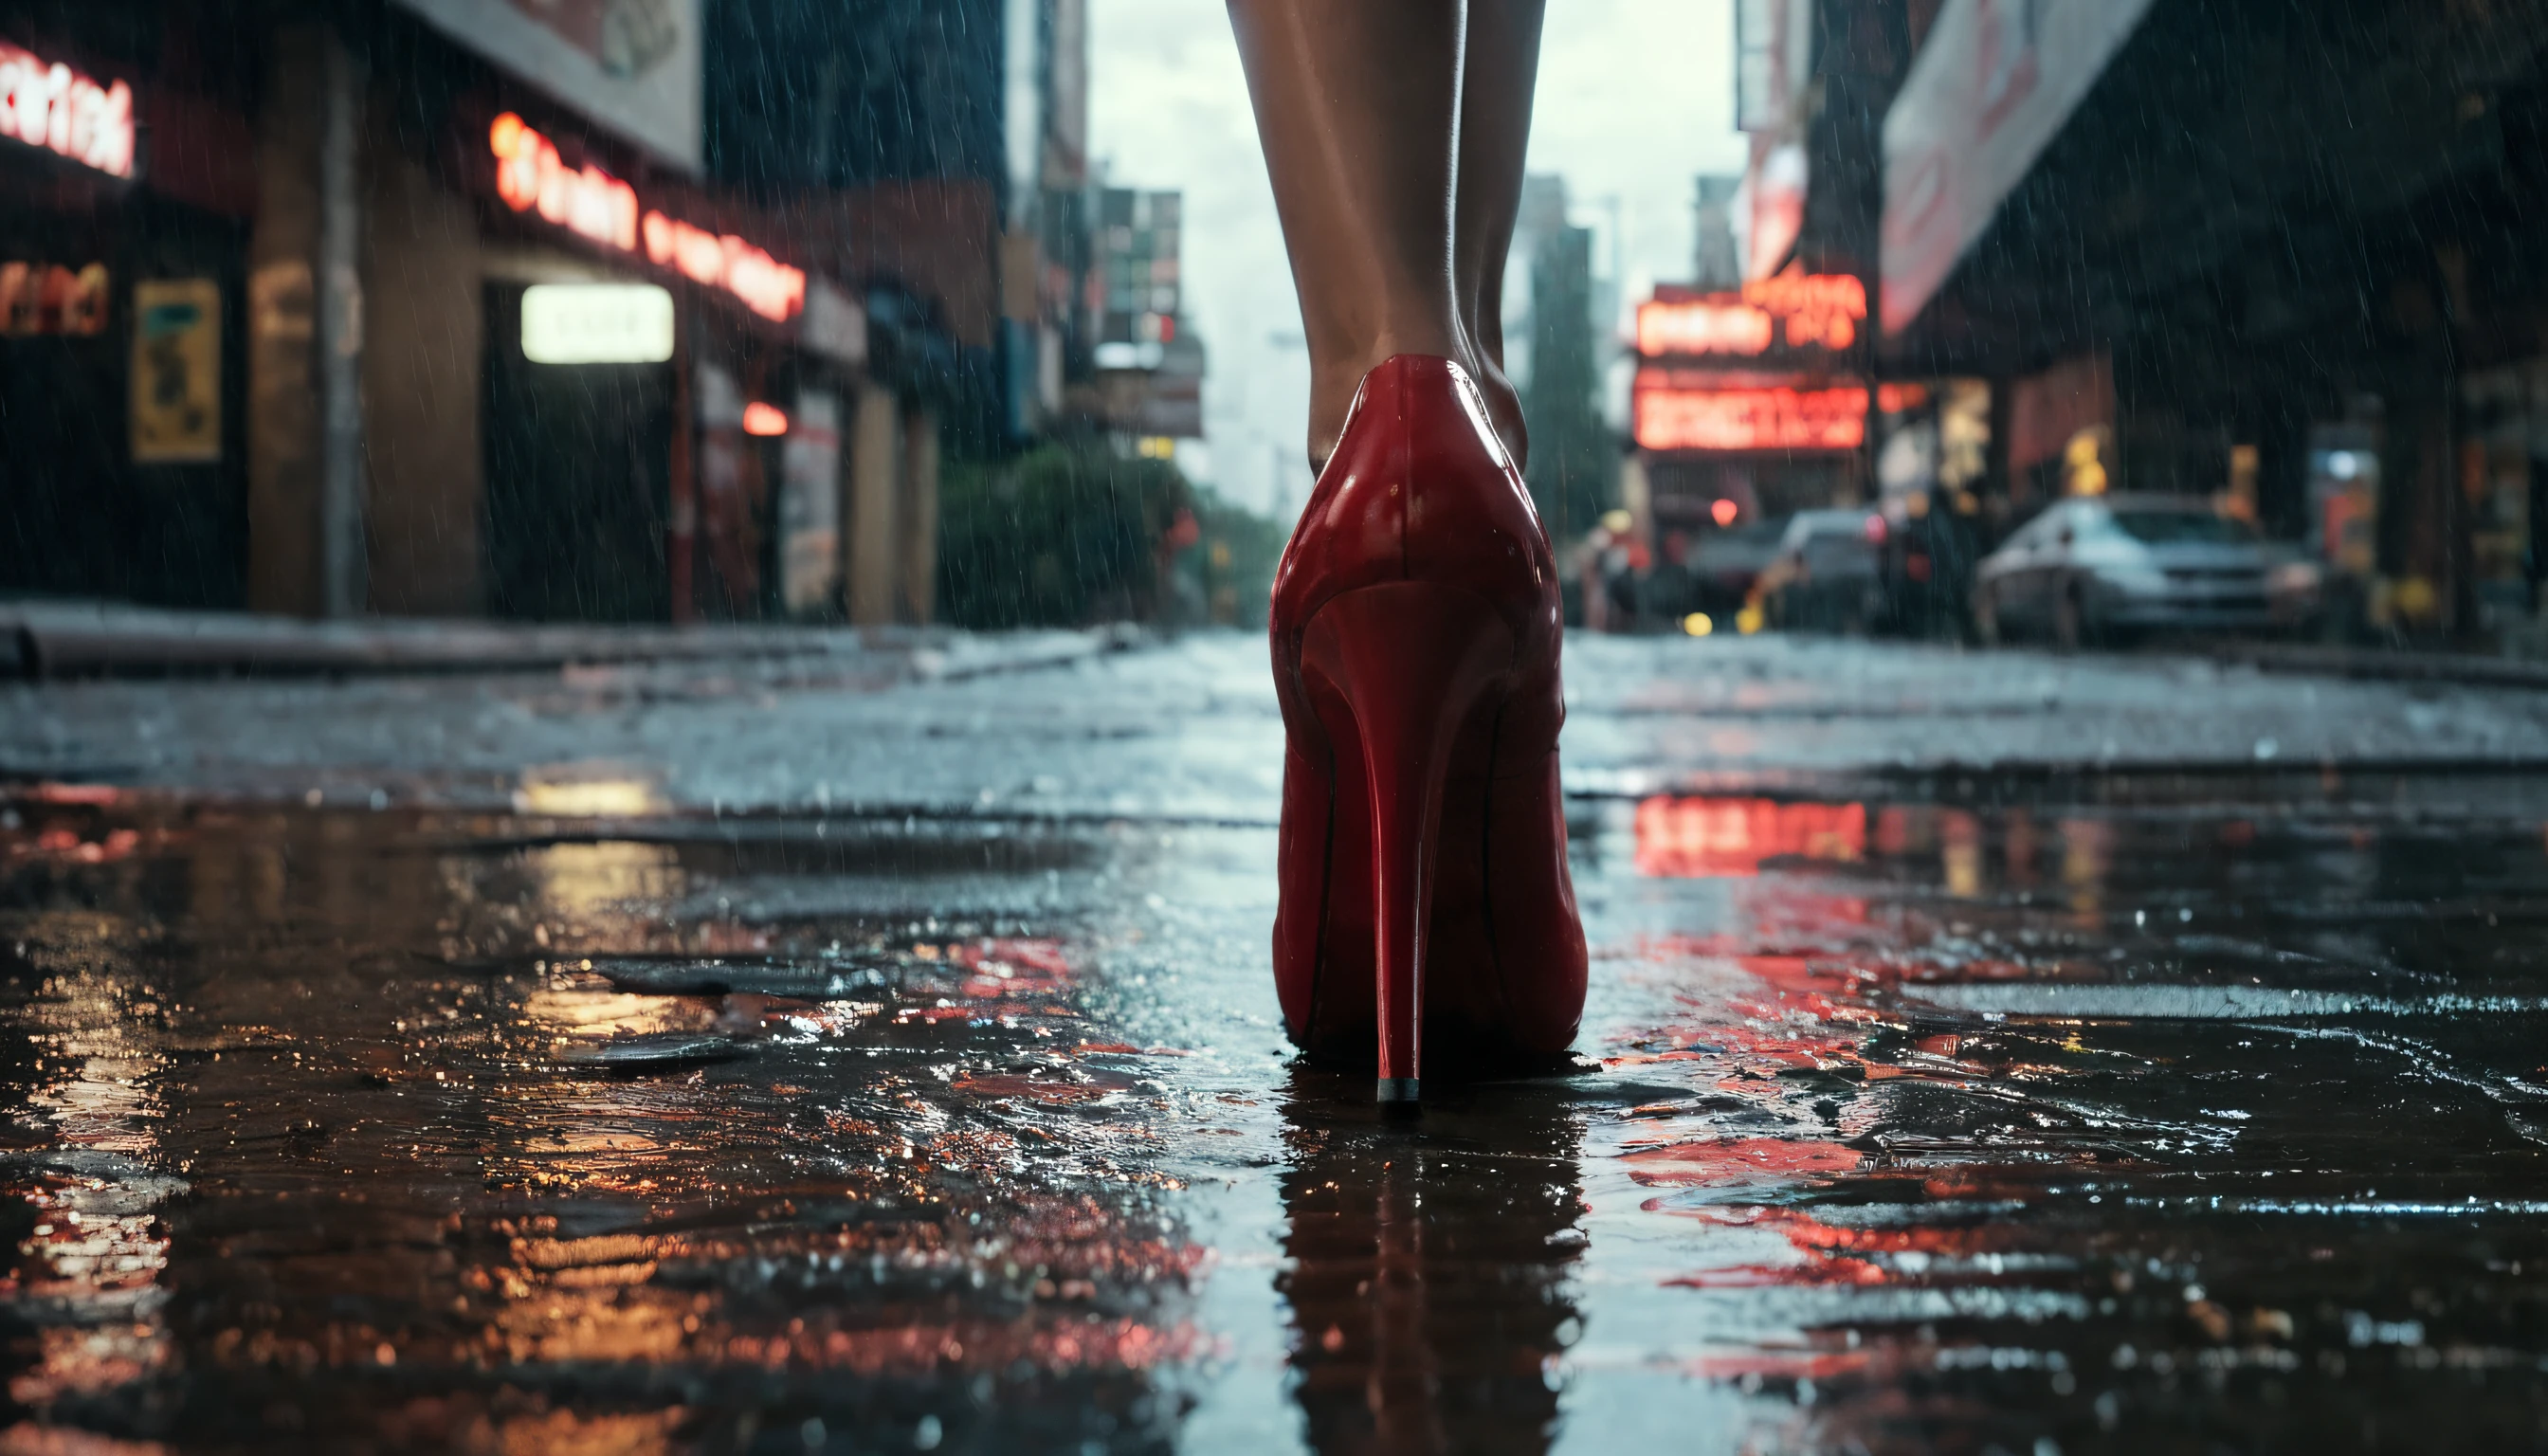 AWARD-WINNING PROFESSIONAL PHOTOGRAPHY, National Geographic, down on the ground view, busy Broadway blvd street at night, drain draining rain , close up of an empty white cigarette pack floating into a sewer grate of a downtown New York City in 2050 after a rainy night, a woman in black dress wearing with Leboutin  shoes heel red shoes walking over the drain, , hyper-realistic, Cyberpunk, cinematic scene, Cityscape, morose, neon-lit, View from above at night during heavy rains, Reflective wet streets, photorealistic, Extremely well done, Arri Alexa LF, Objectif 14mm, Light streaks, DOF, Lens Flares, 8k, Hdr, volumeric lighting, Lens Flares,Intricate details, raw